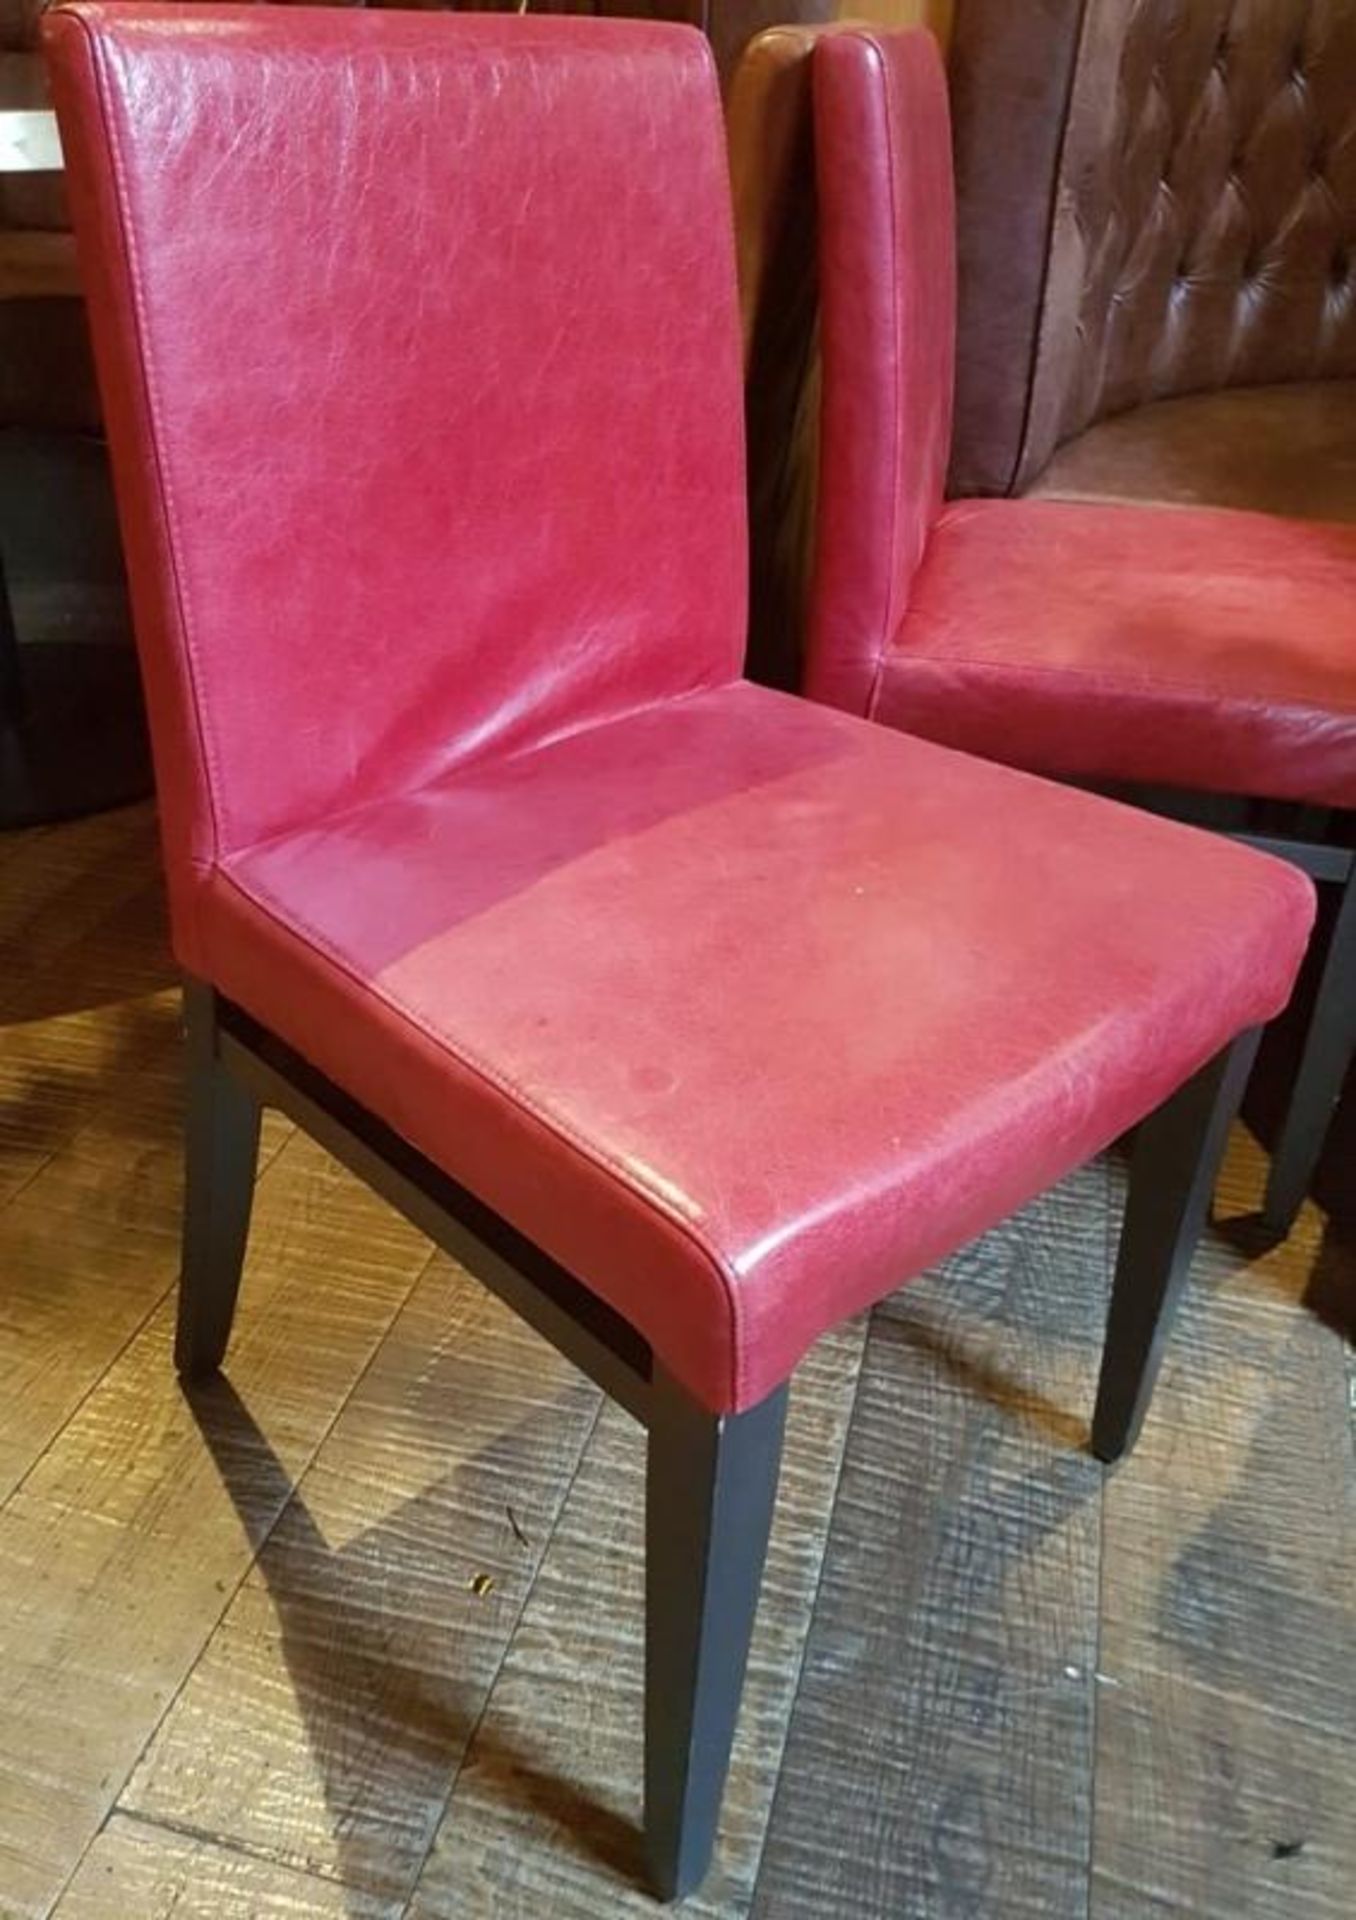 4 x Hard-wearing Red Leather Upholstered Commercial Dining Chairs - Recently Removed From A City Cen - Image 3 of 4